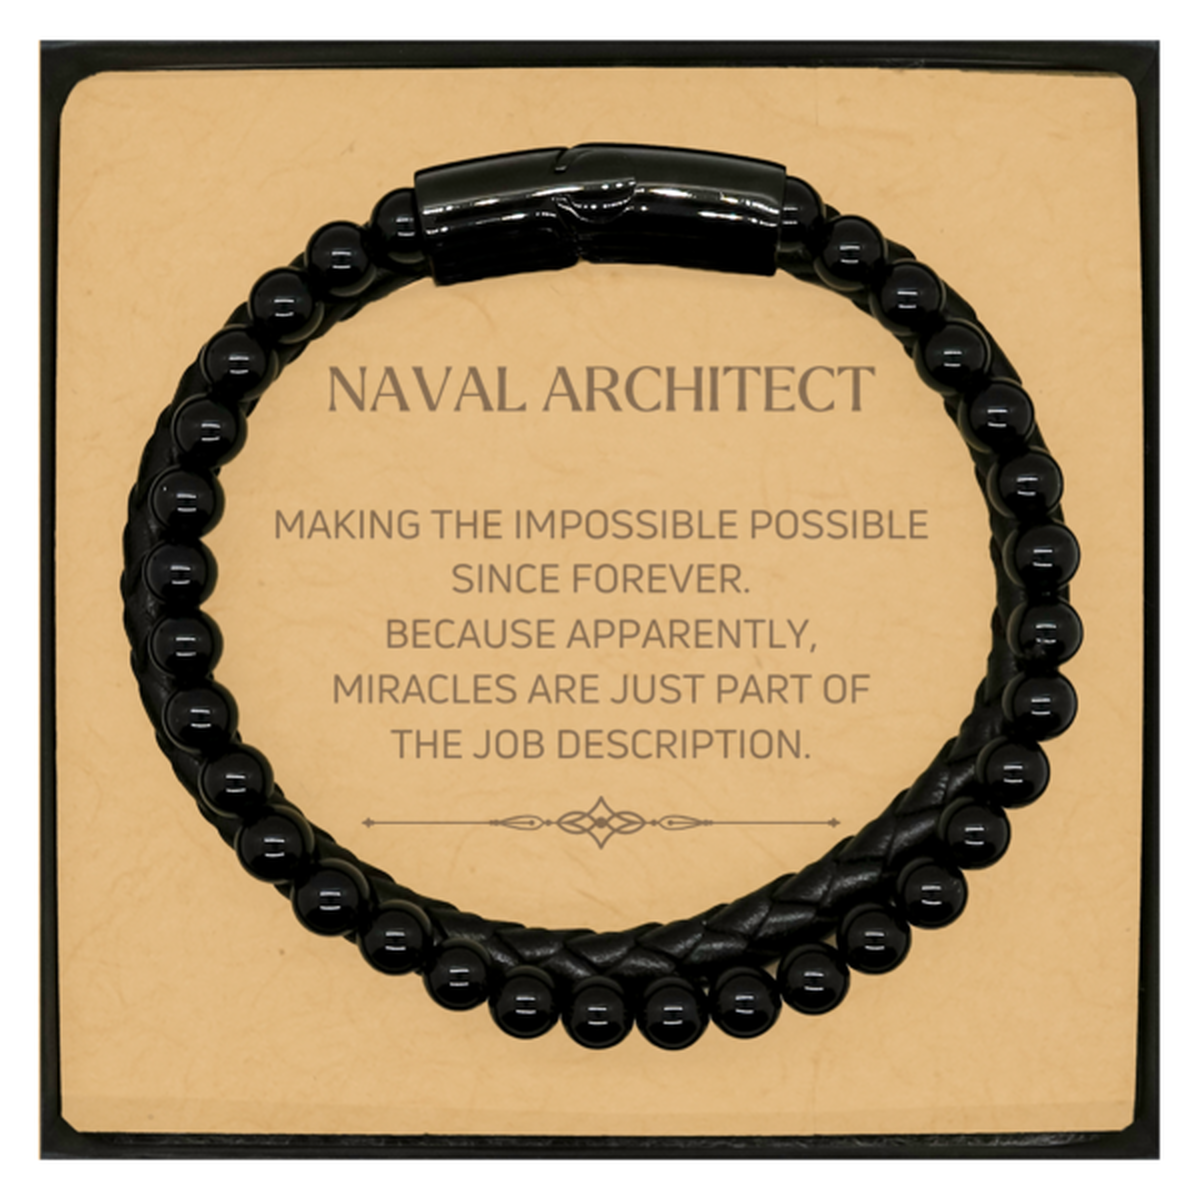 Funny Naval Architect Gifts, Miracles are just part of the job description, Inspirational Birthday Christmas Stone Leather Bracelets For Naval Architect, Men, Women, Coworkers, Friends, Boss